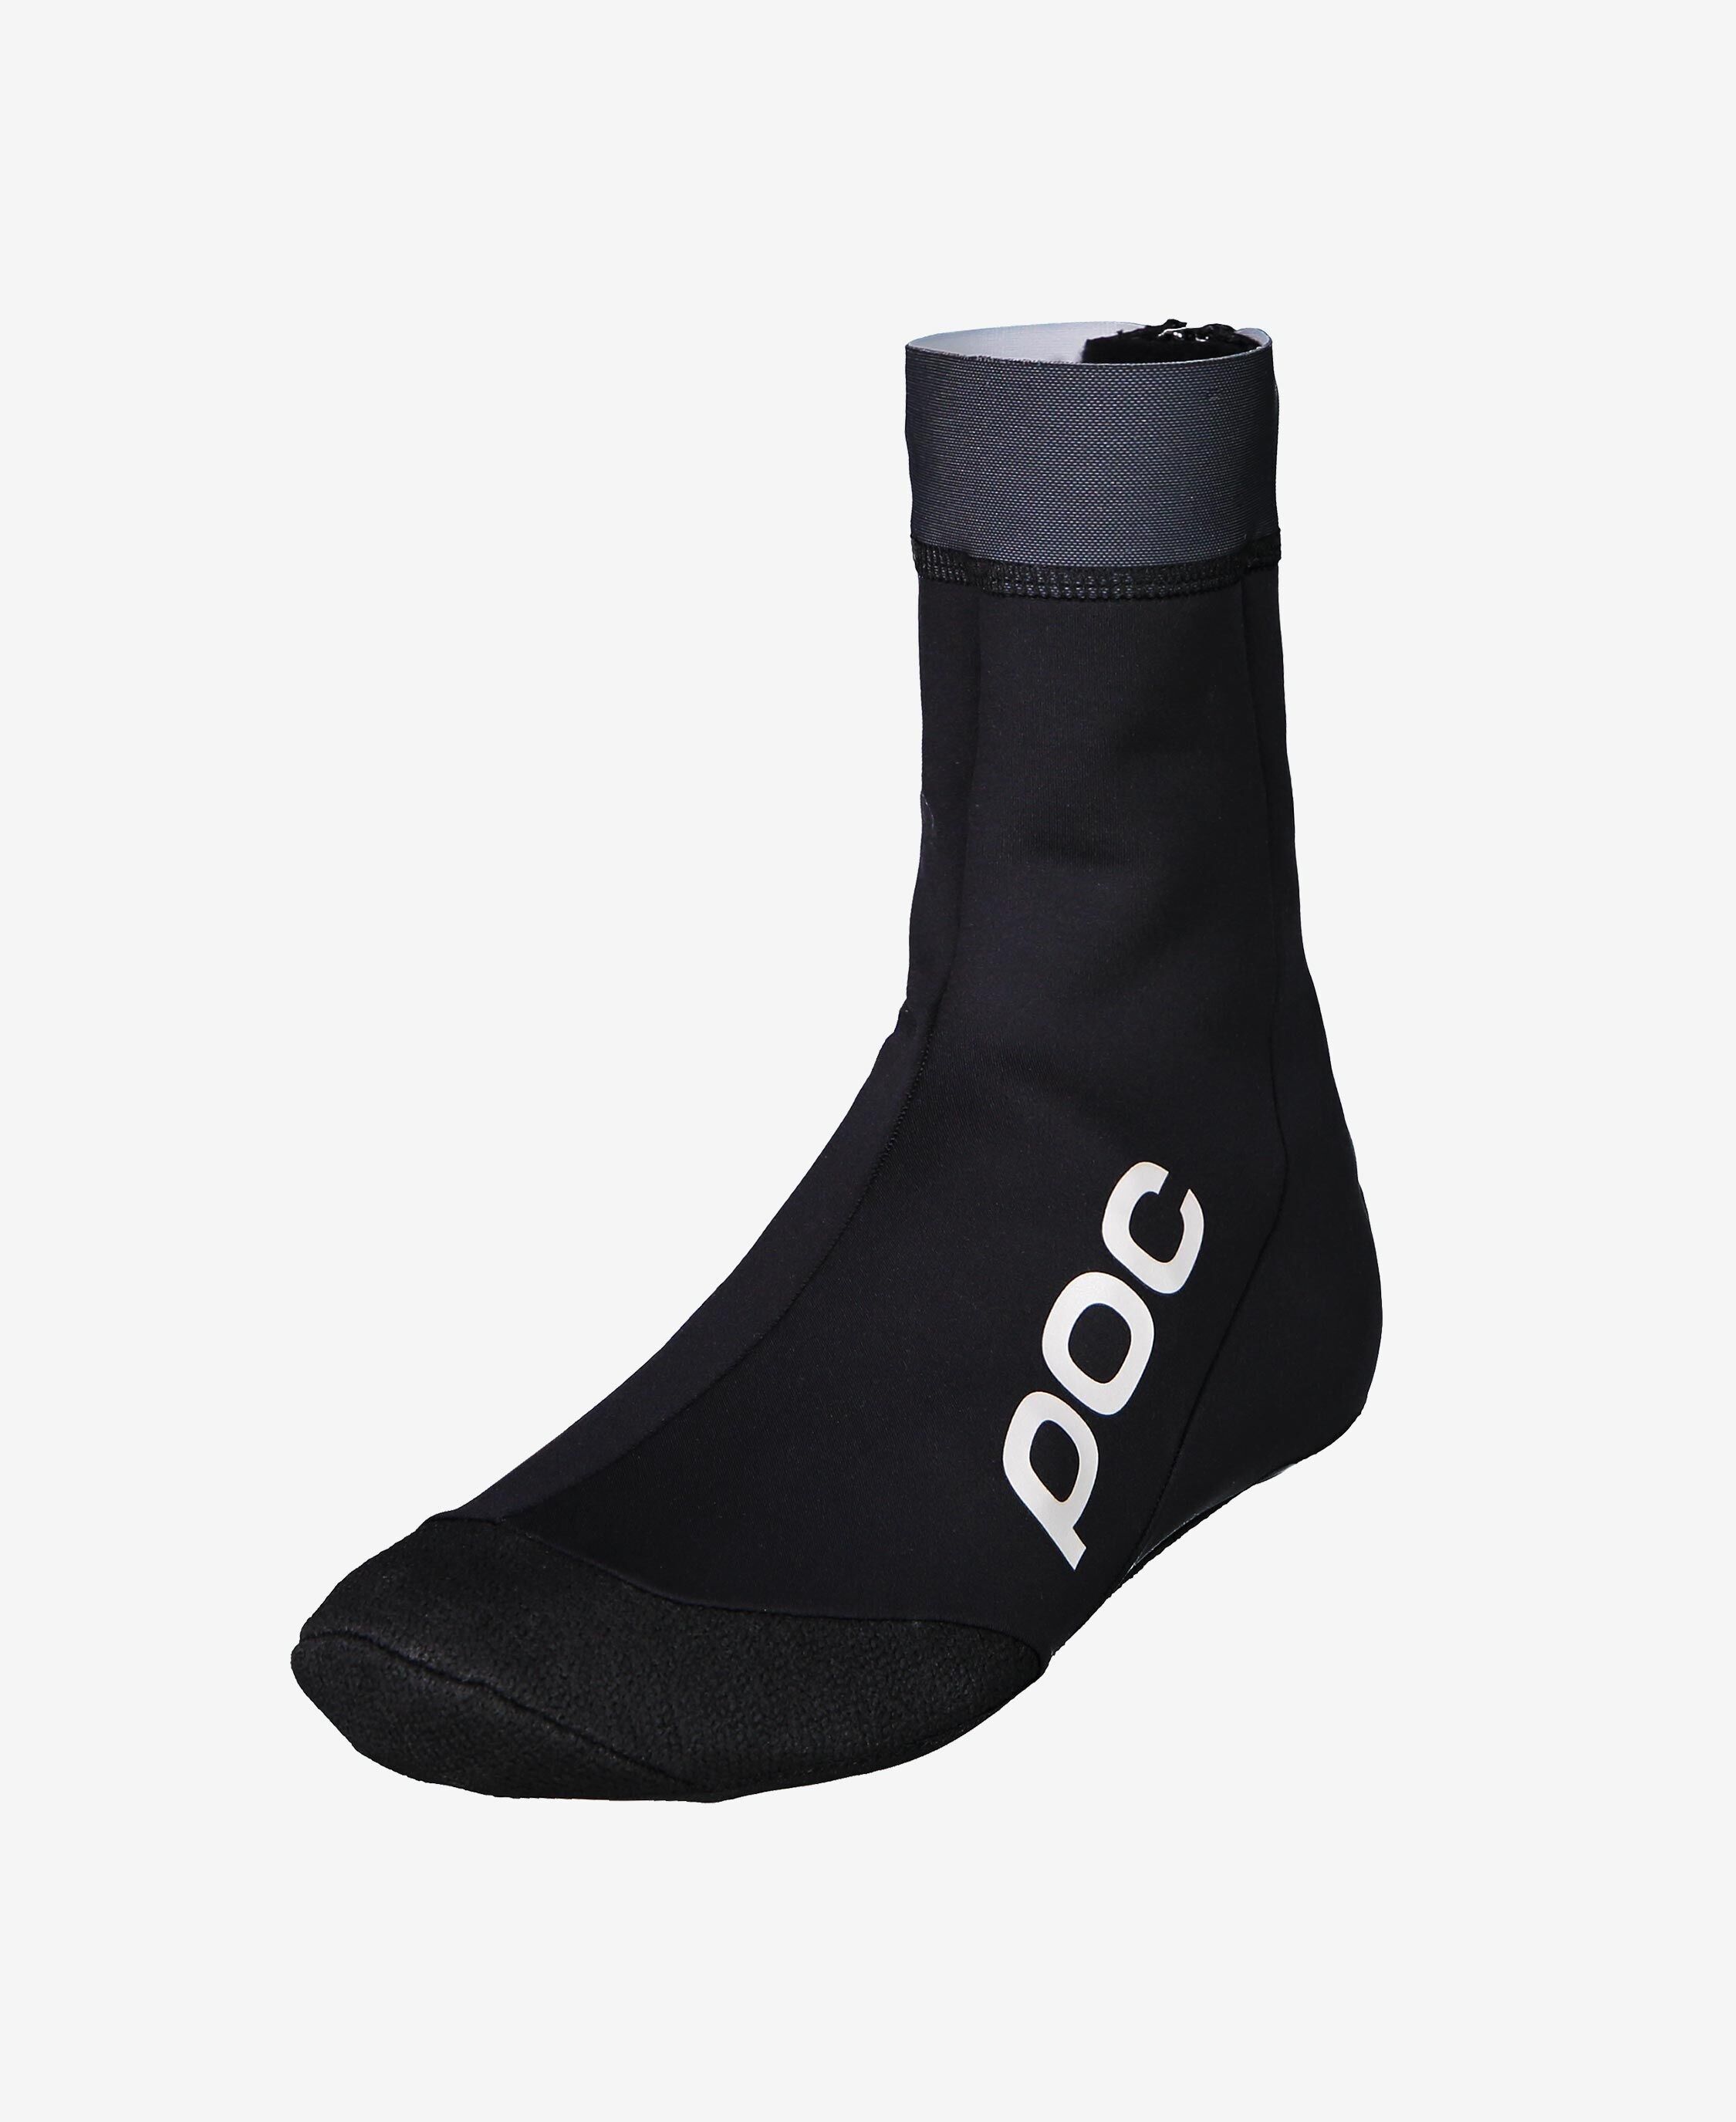 Poc Thermal Bootie - Cycling overshoes